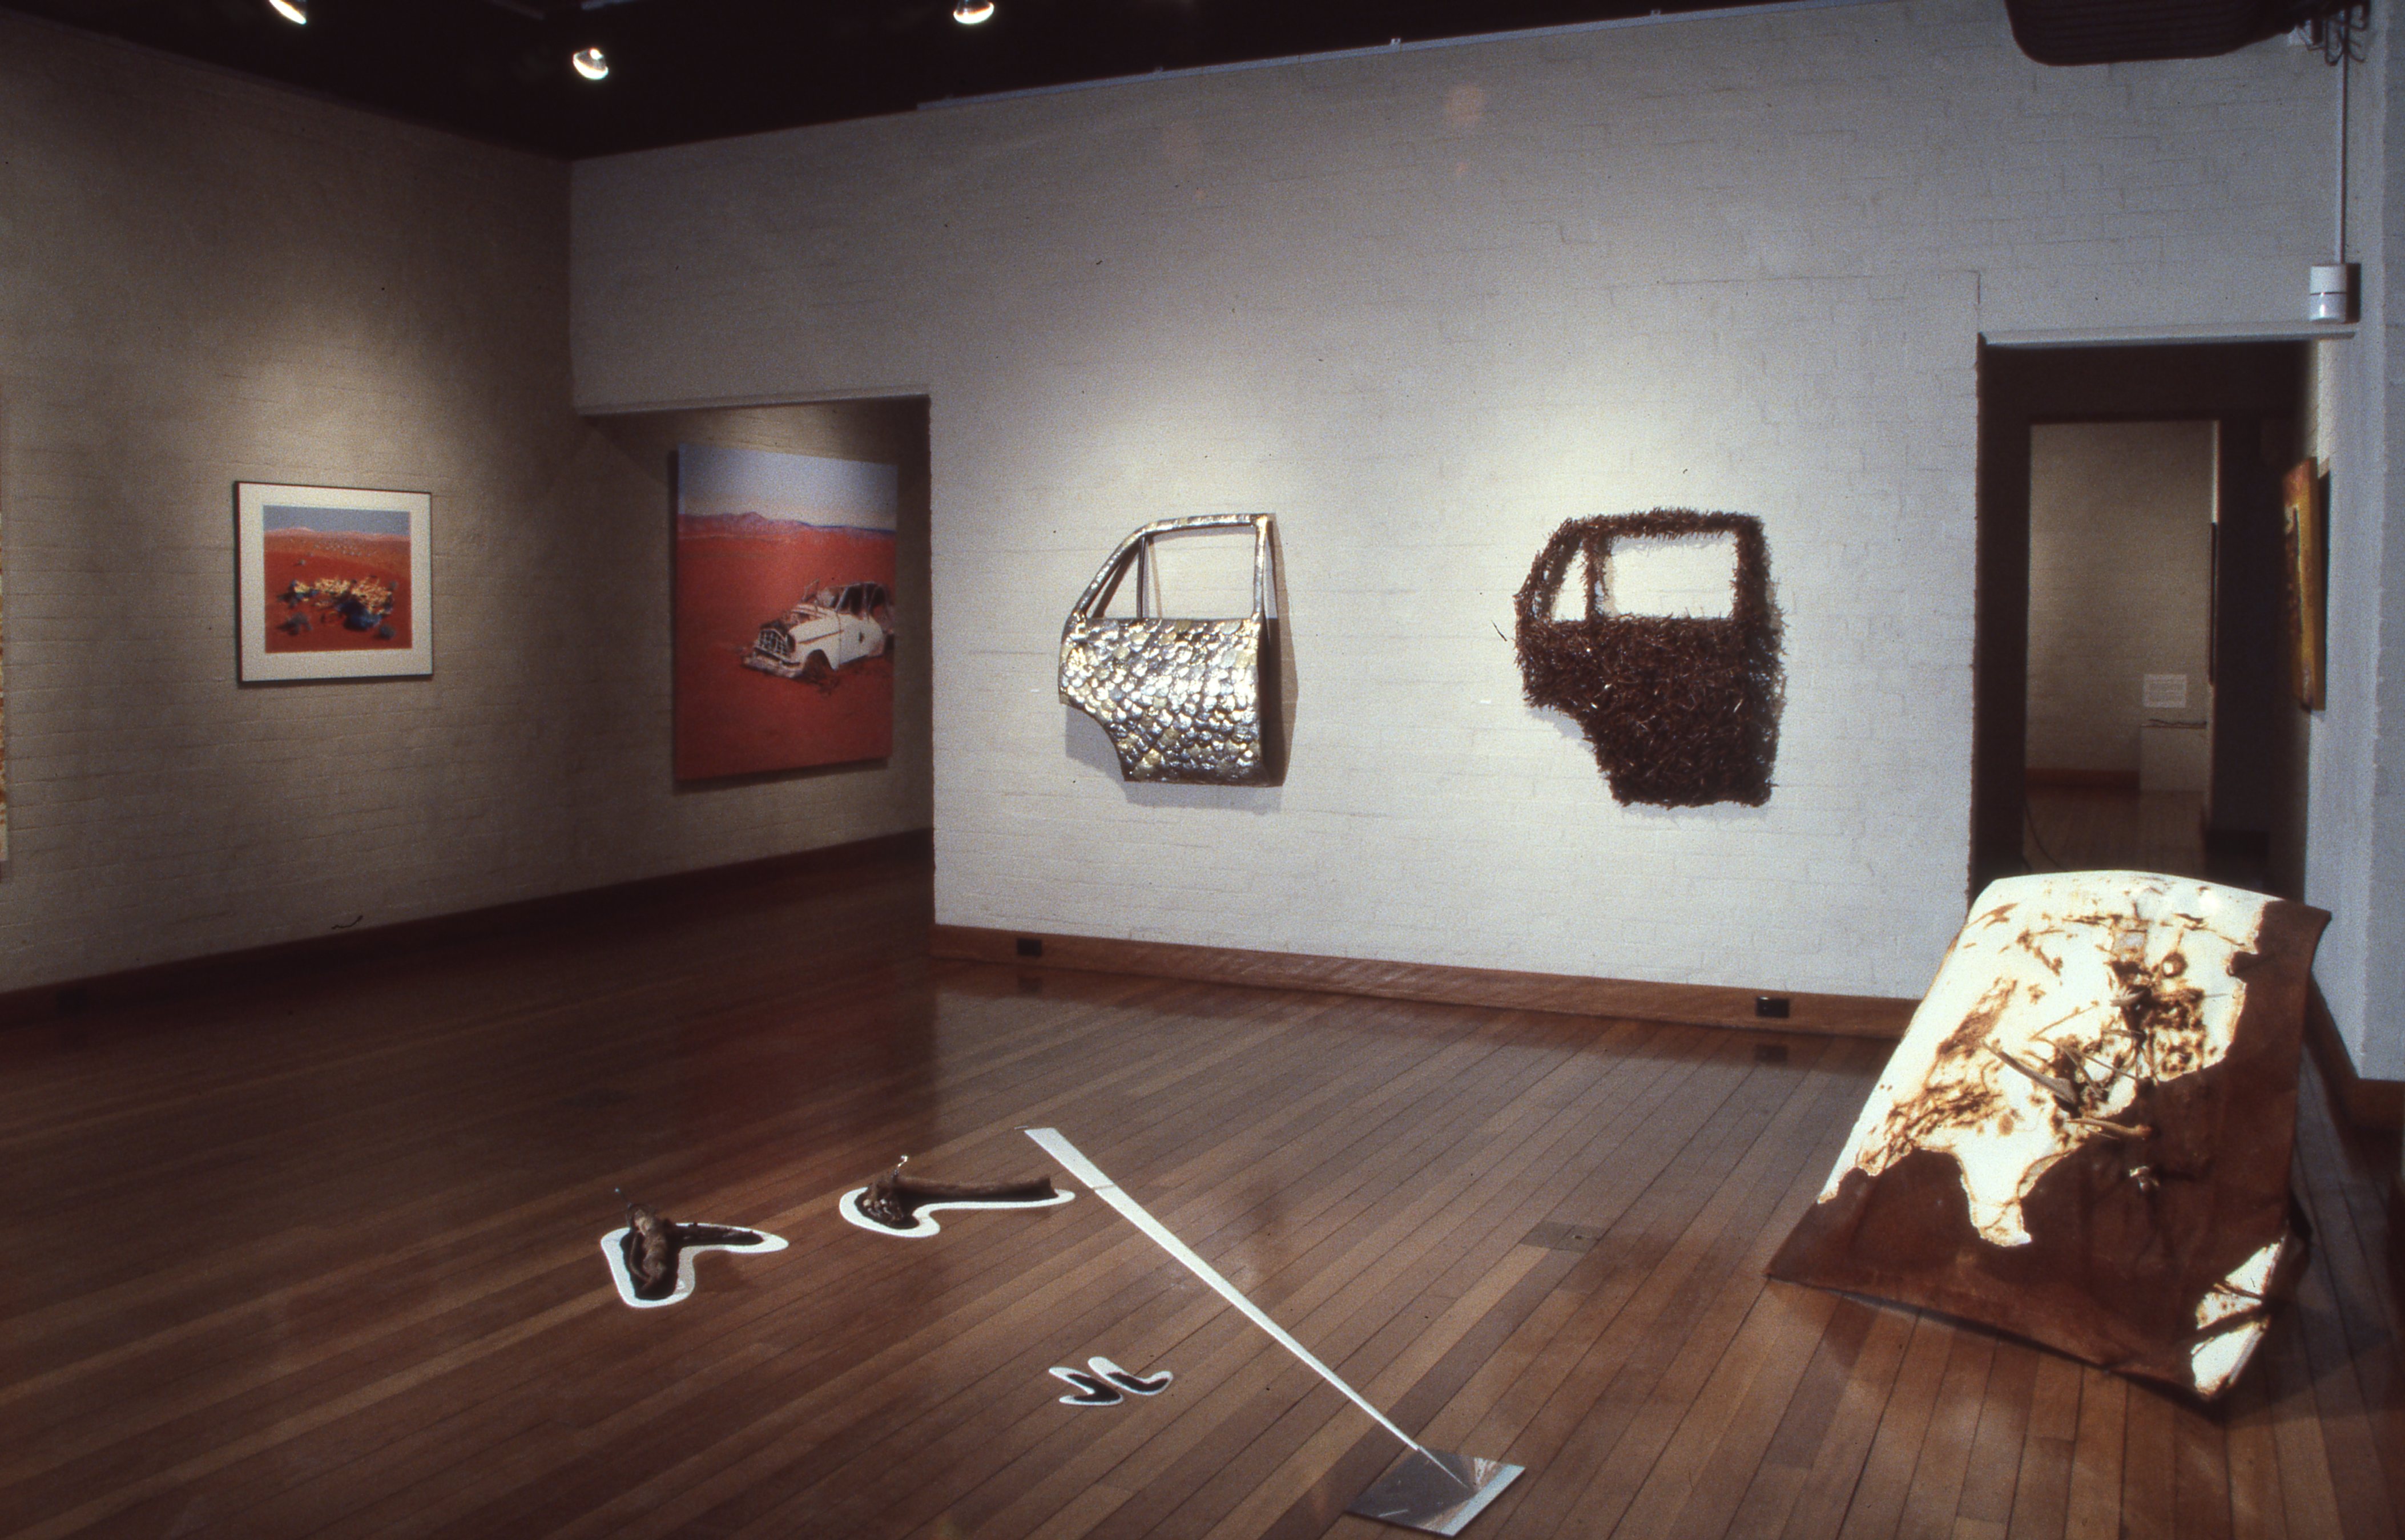 idg_archive_1988_ann_newmarch_as_the_serpent_struggles_david_kerr_humdrum_on_the_highway_002_install.jpg